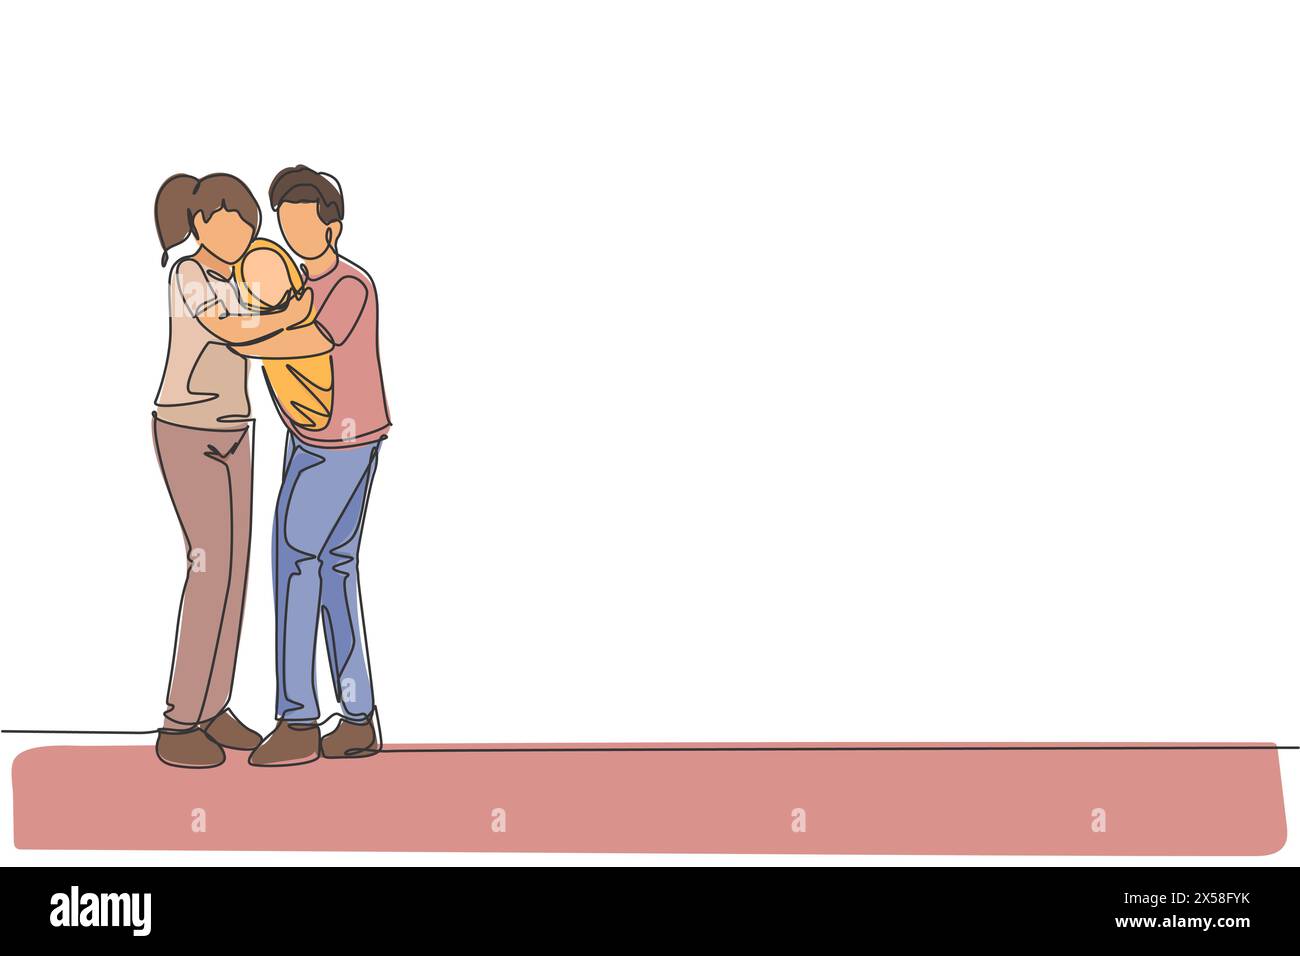 One single line drawing of young happy mother and father hugging their baby together full of warmth graphic vector illustration. Parenting education c Stock Vector